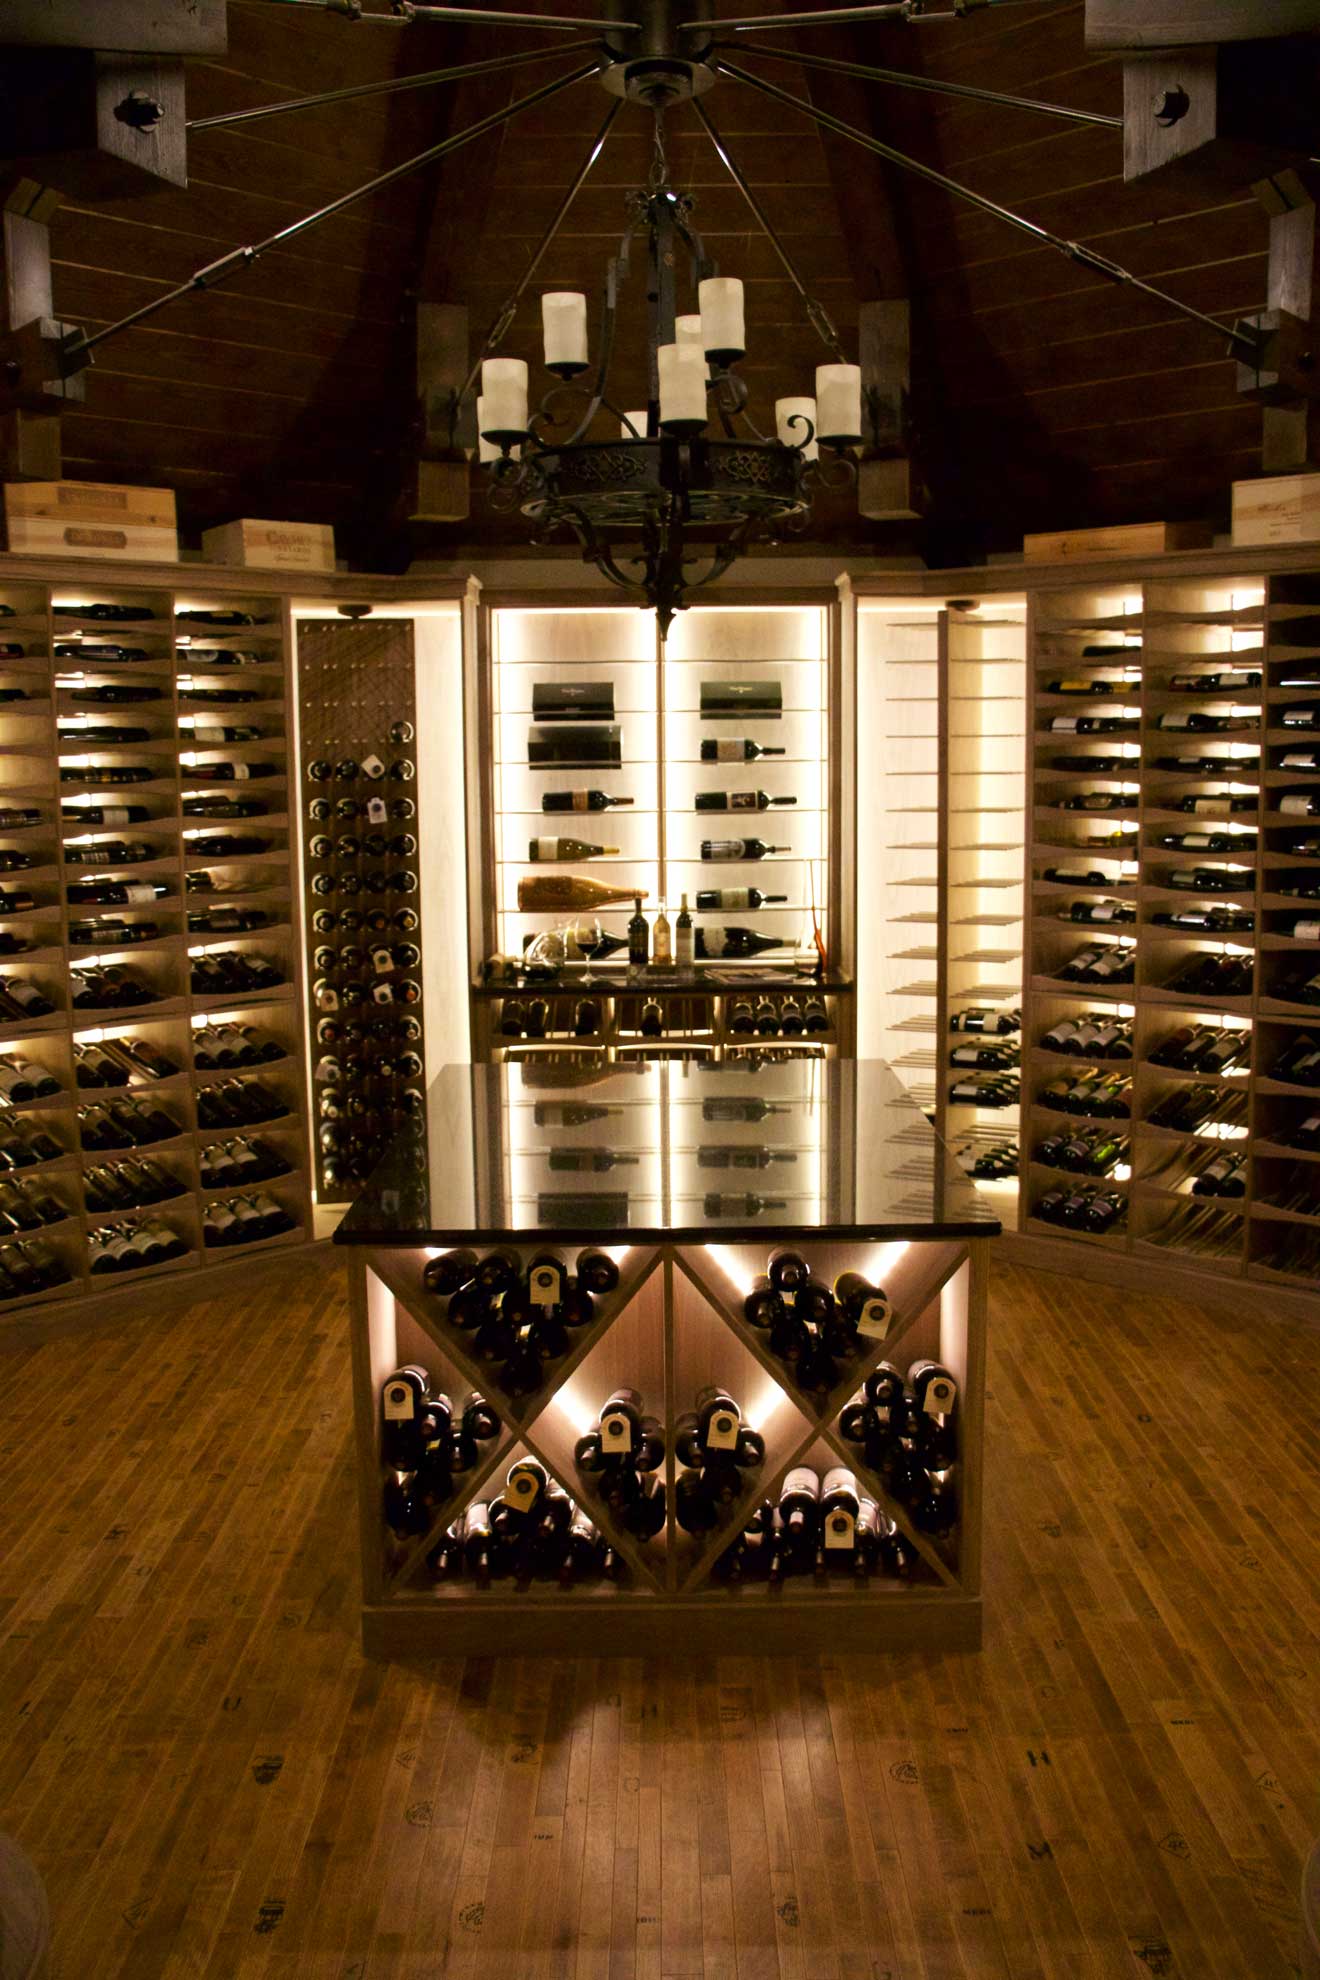 The Focal Point of the Wine Cellar